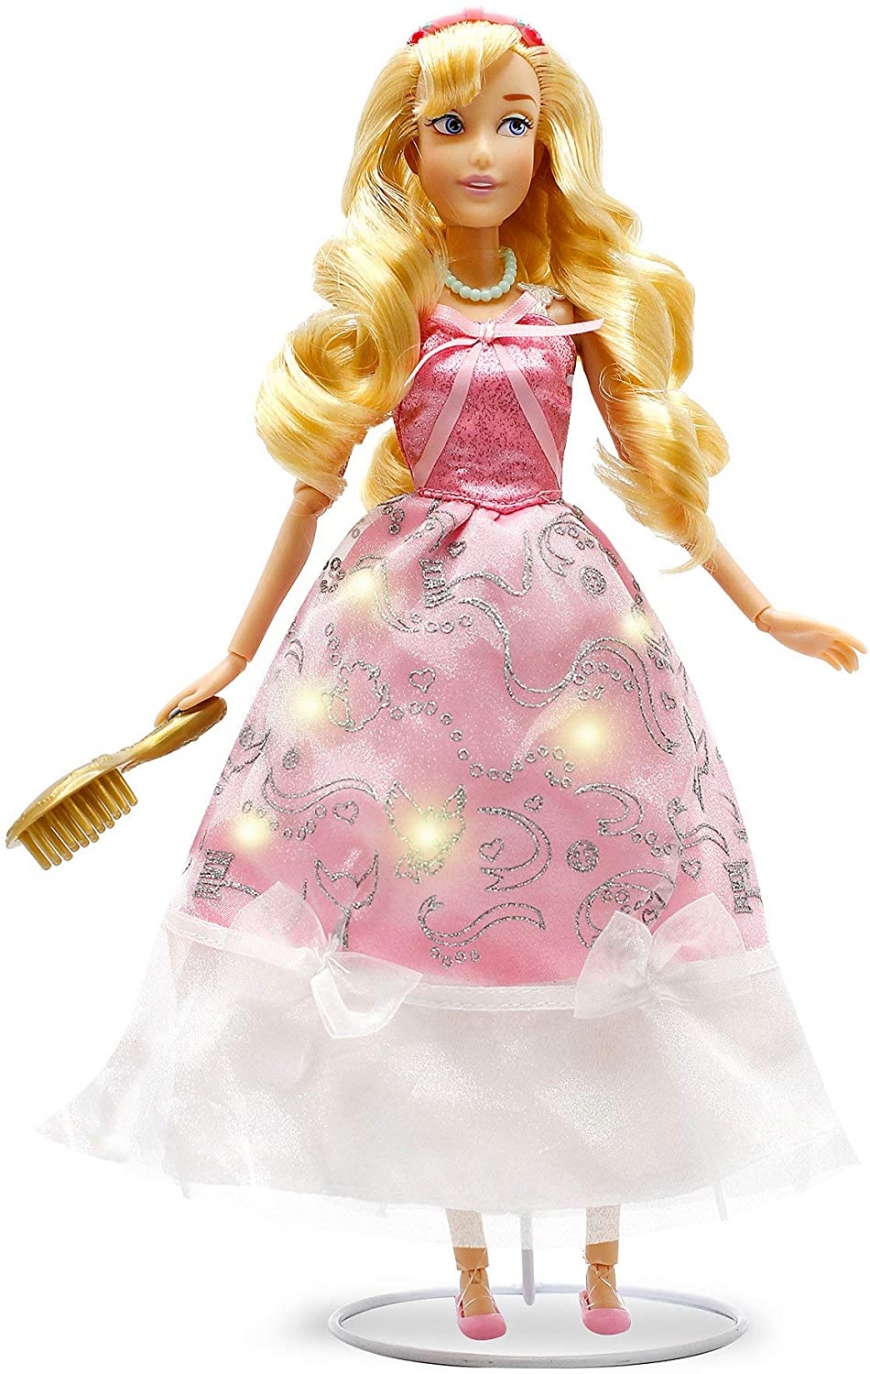 Disney Store Light-Up Dress Cinderella doll in pink made by mice and birds dress